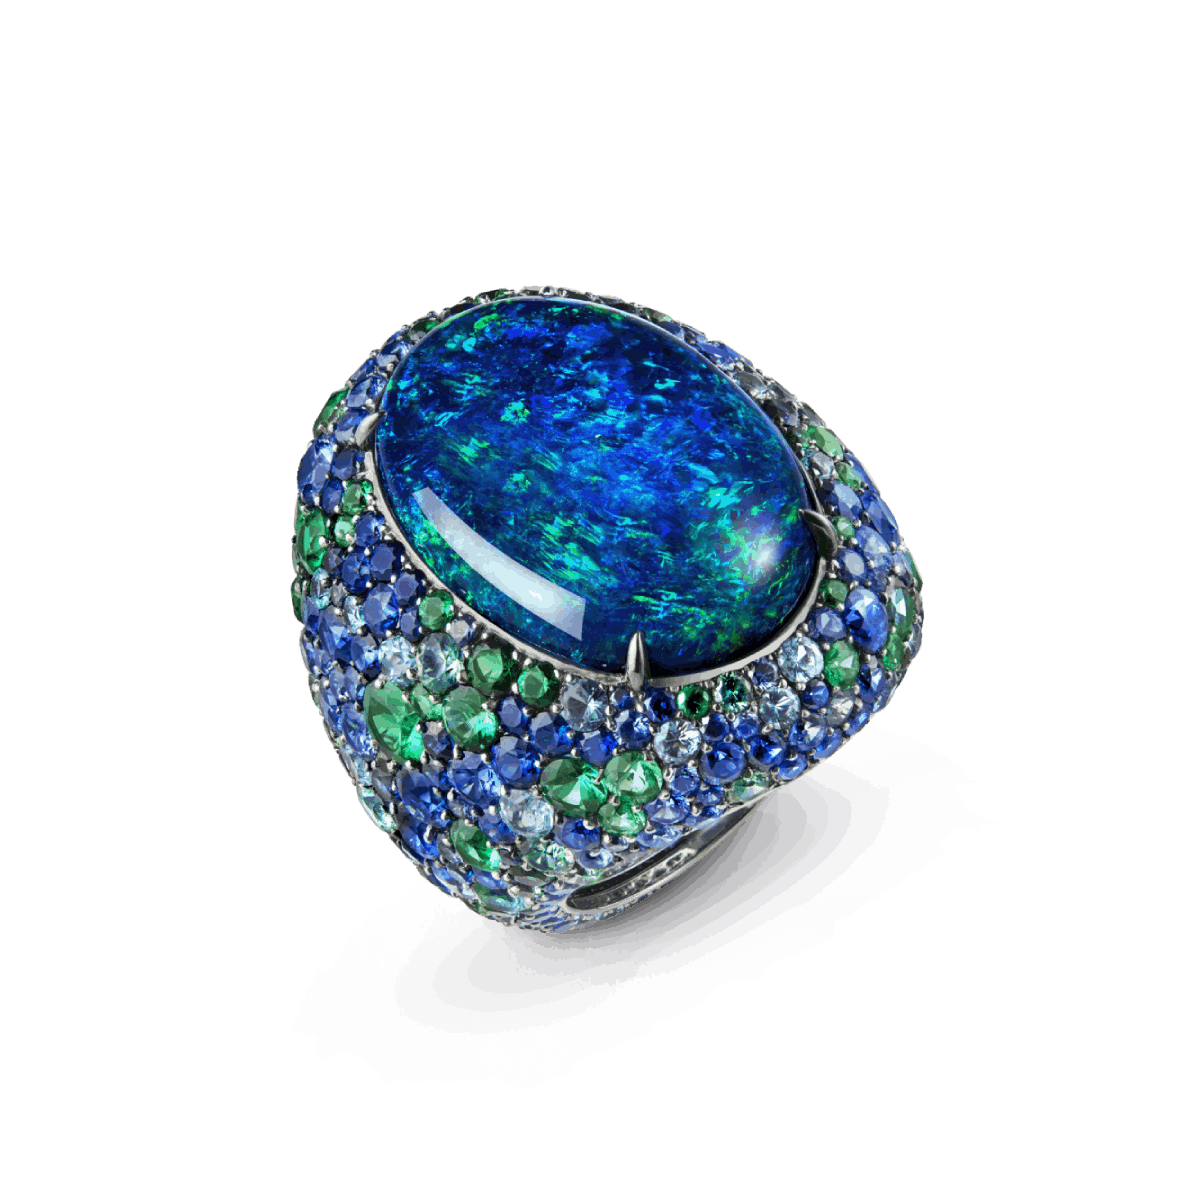 ILLUSION - Ring set with a 30.98 ct oval cabochon black opal from Australia, in white gold.